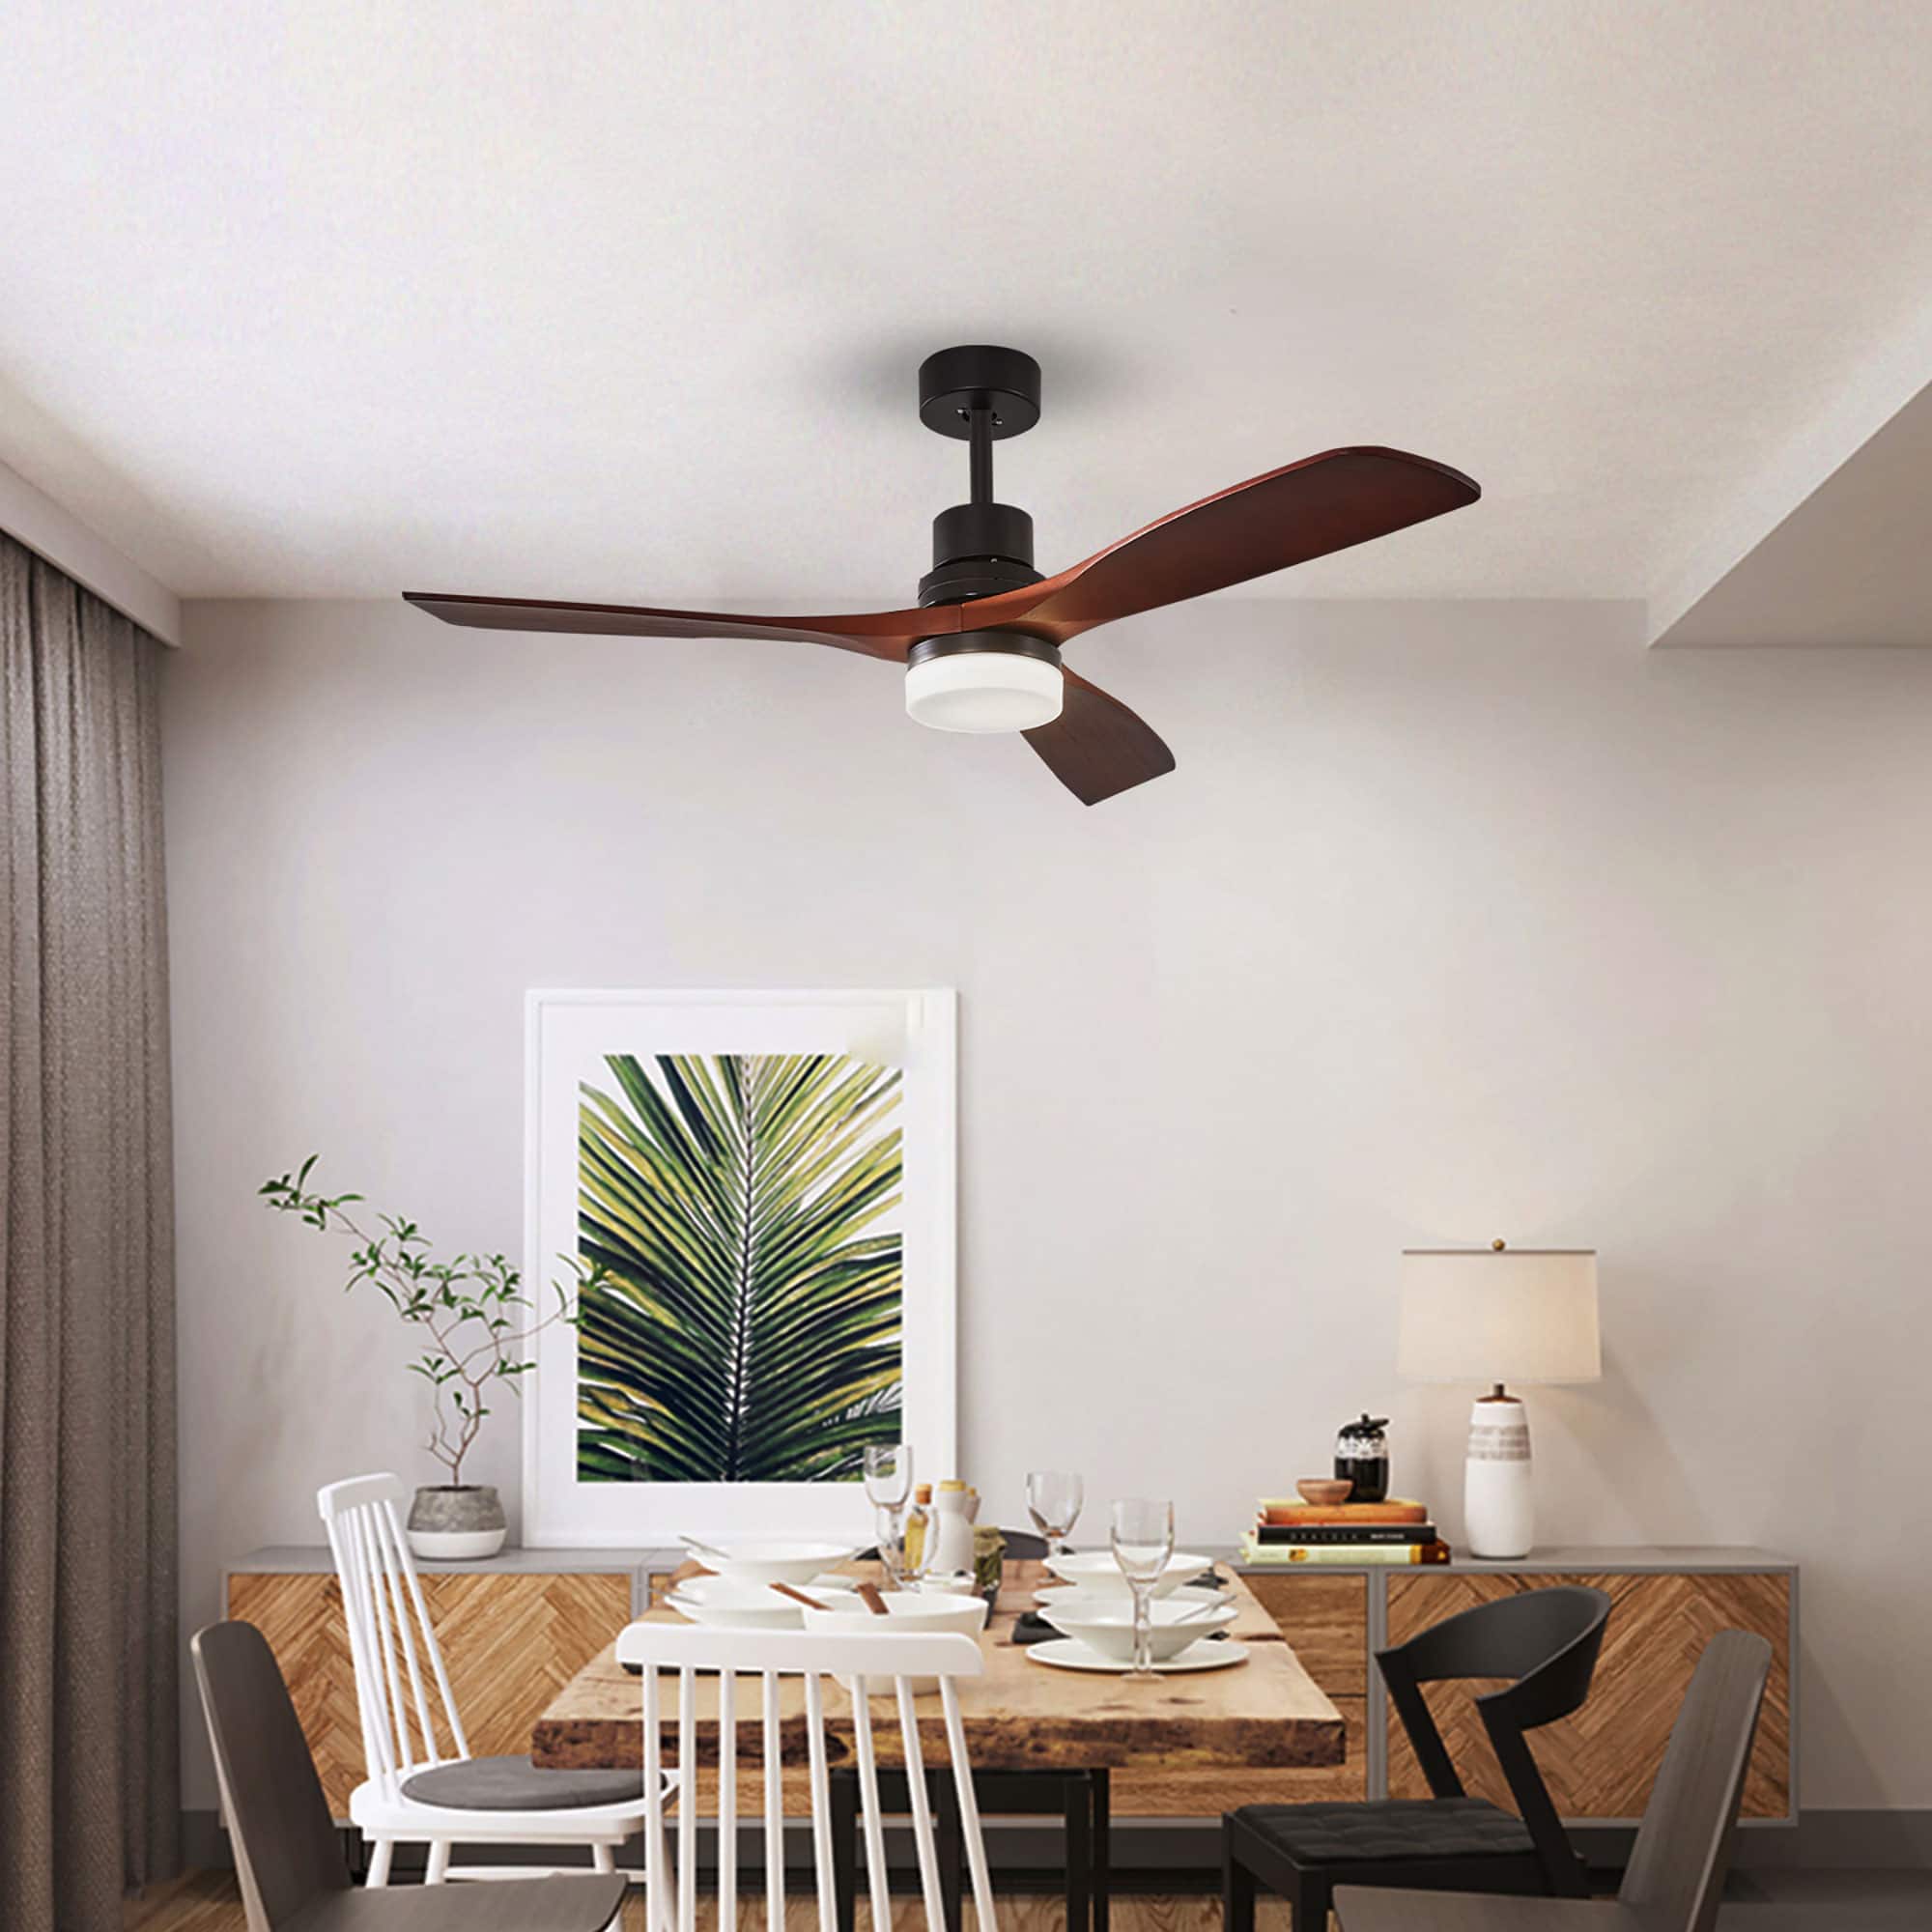 52 in. Indoor Solid Wood Chandelier Six-speed Ceiling Fan with Light and Remote Control, Bulb not included-Boyel Living